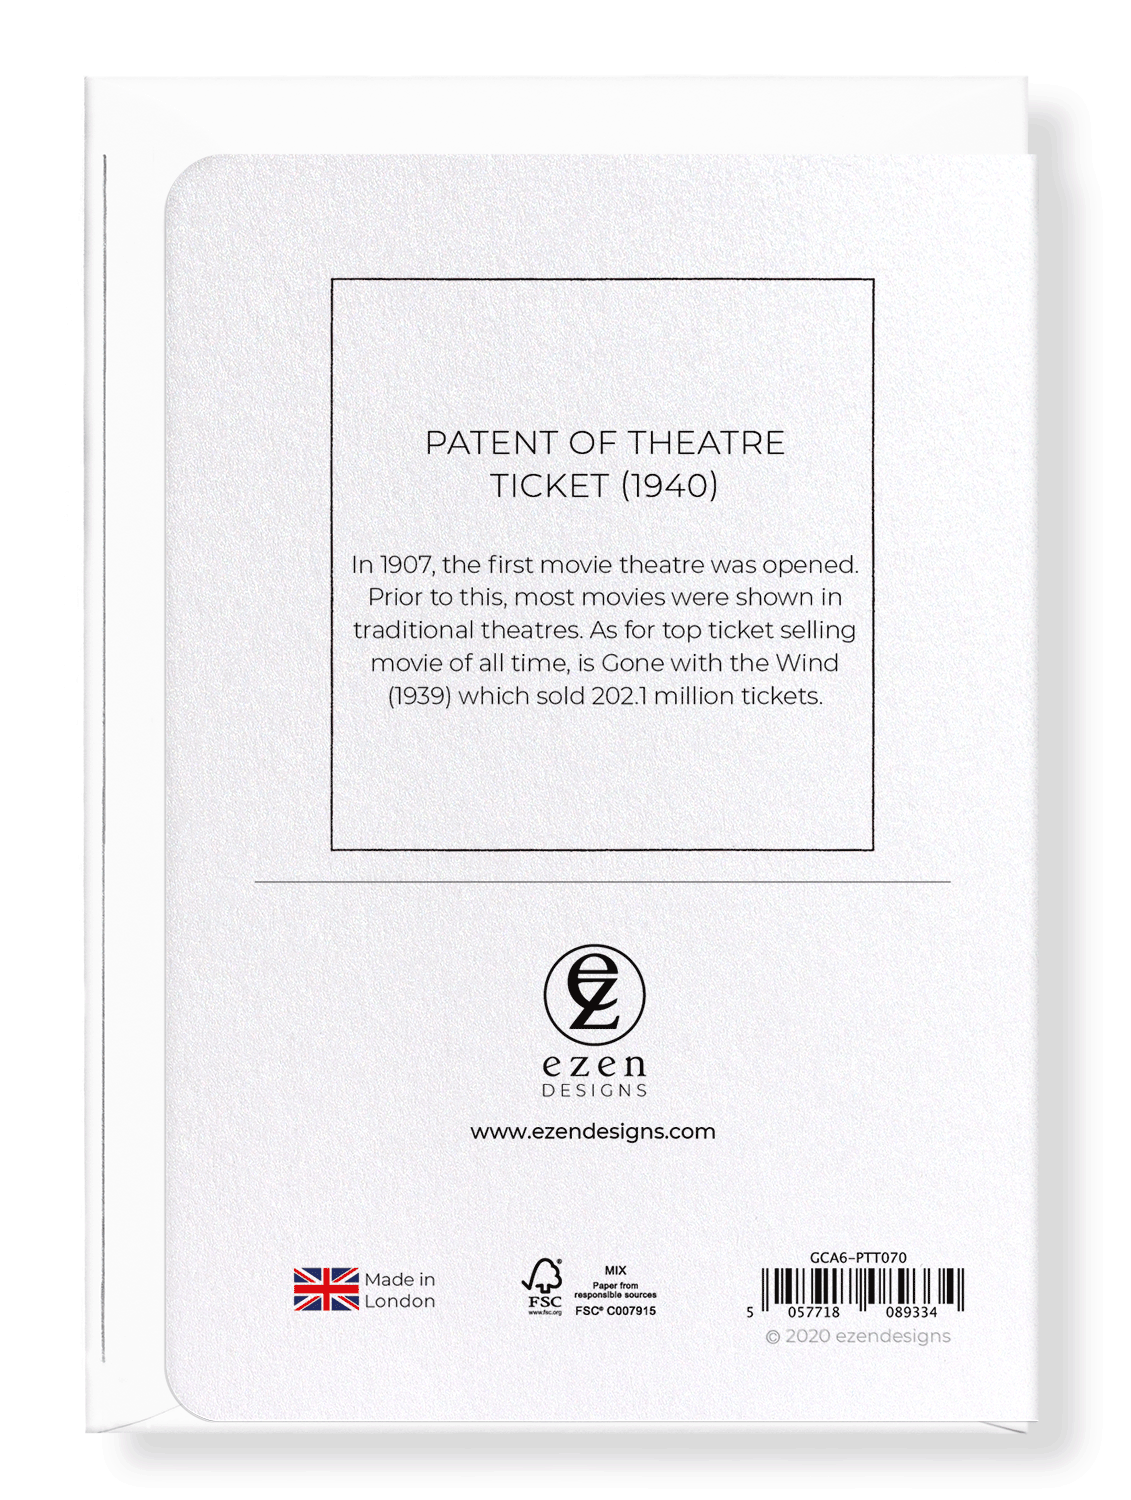 Ezen Designs - Patent of theatre ticket (1940) - Greeting Card - Back